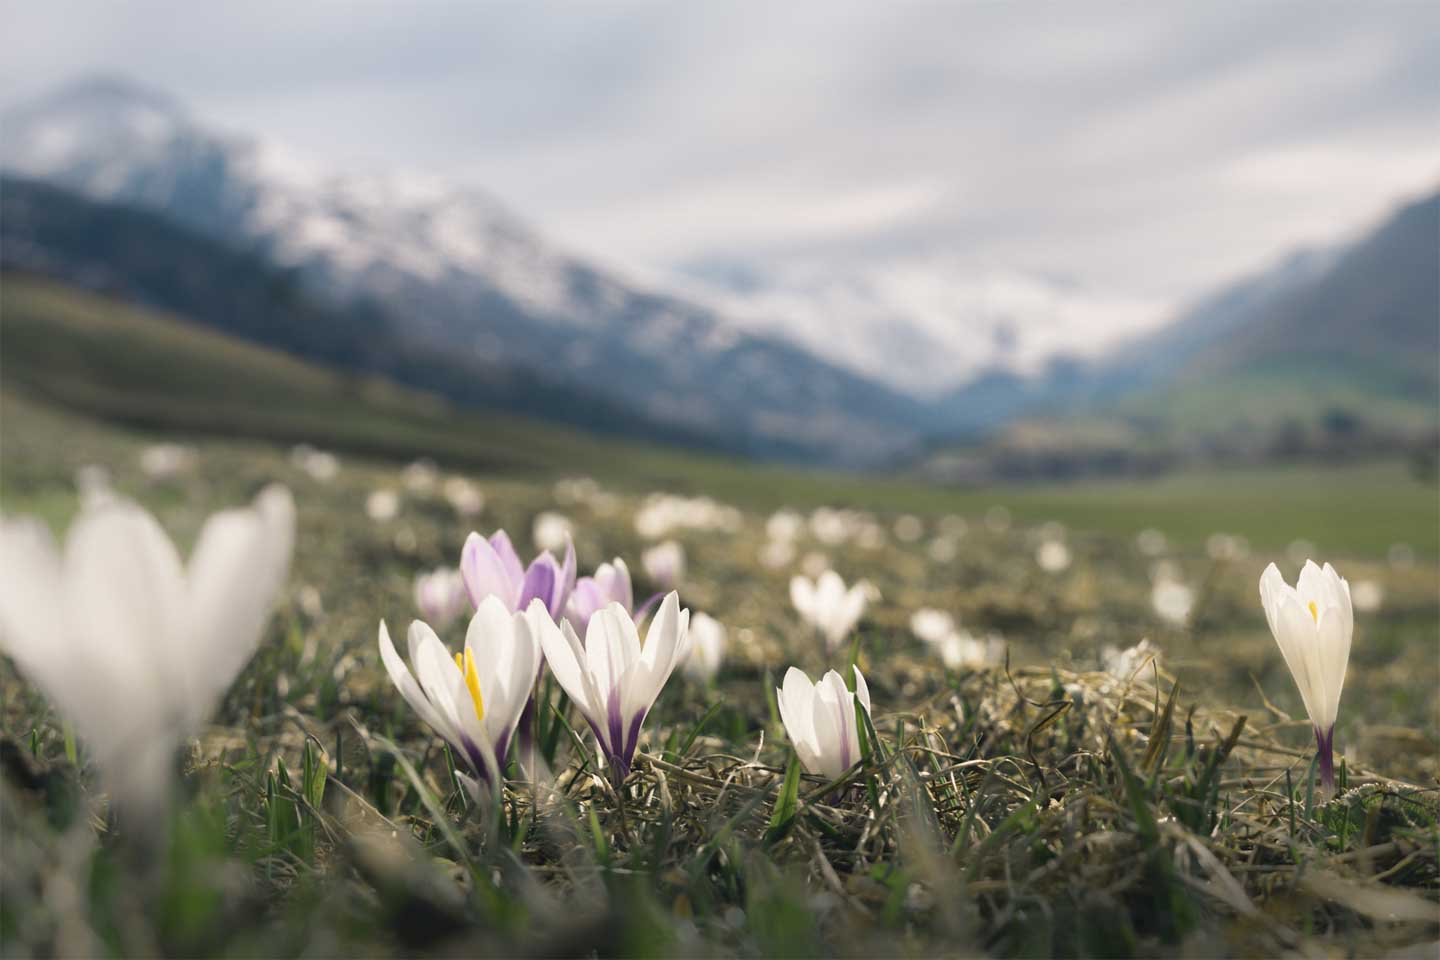 CJPOTY round 3 (March 2023) shortlisted image - crocuses